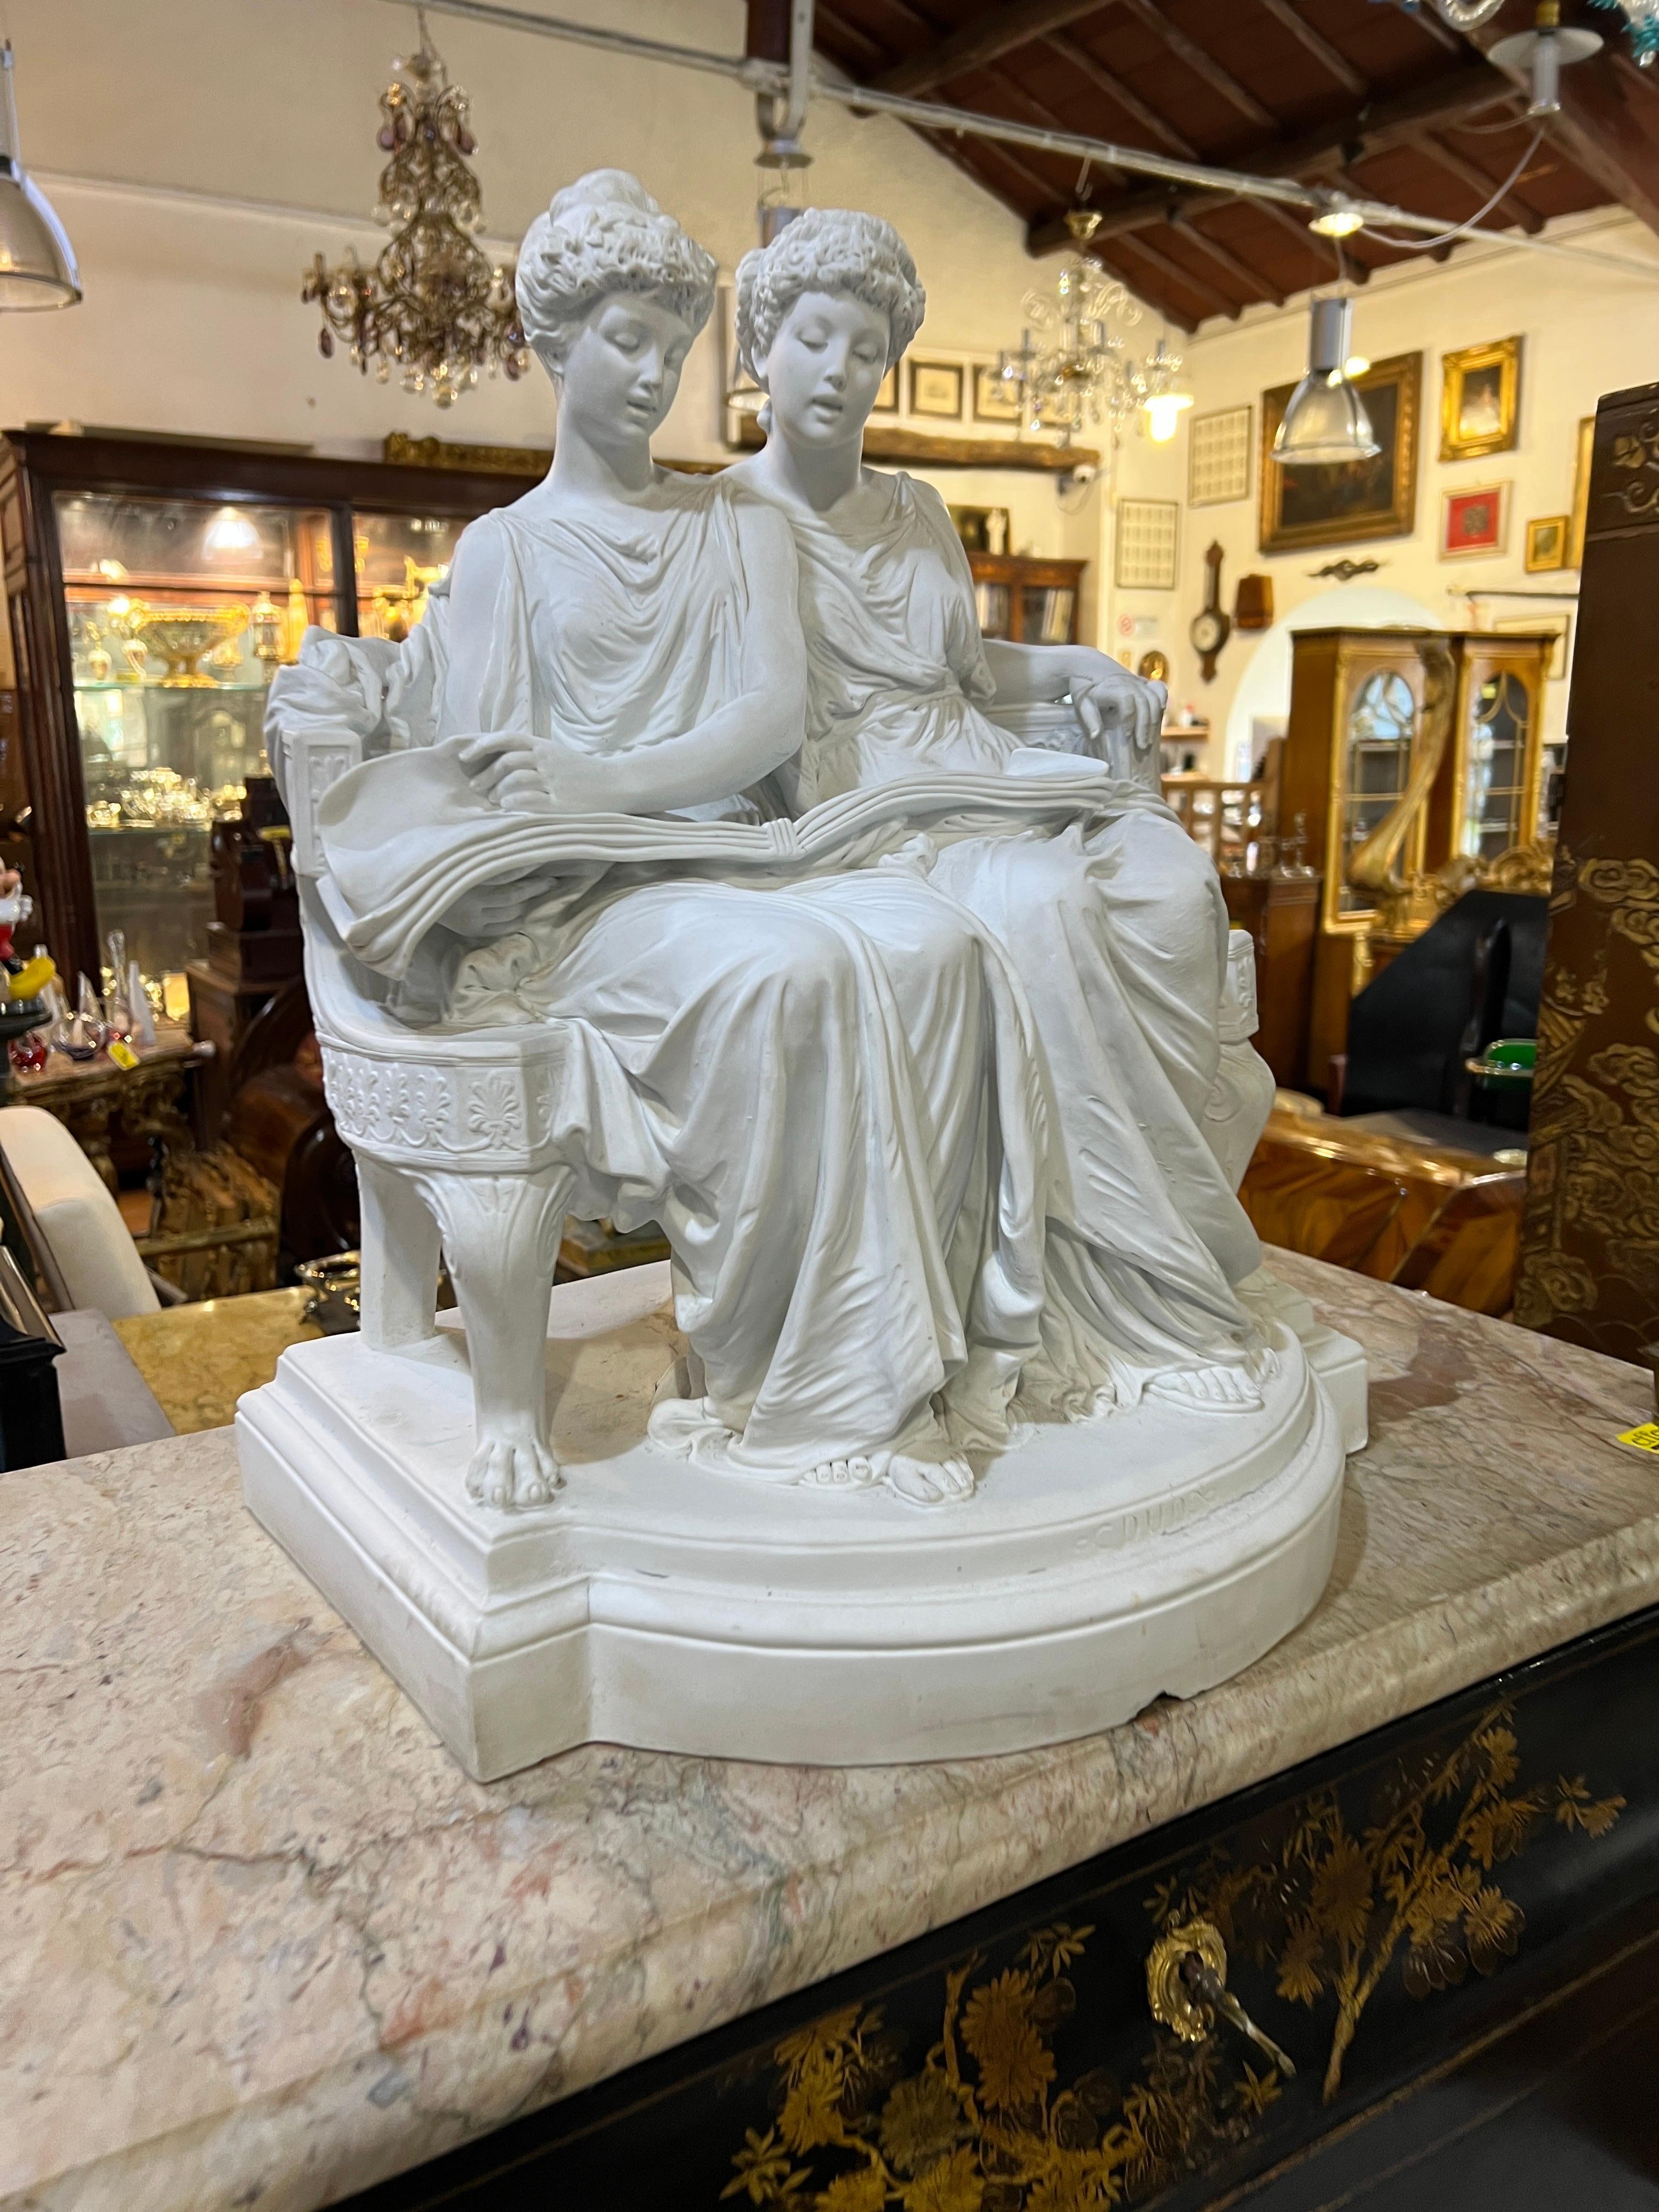 Magnificent example of French porcelain Biscuit workmanship, An imposing biscuit group entitled 'Duo'
of remarkable workmanship and sculpture, enormous attention to detail, this work could be attributed to E. Lanteri, sculptor perla royal factory